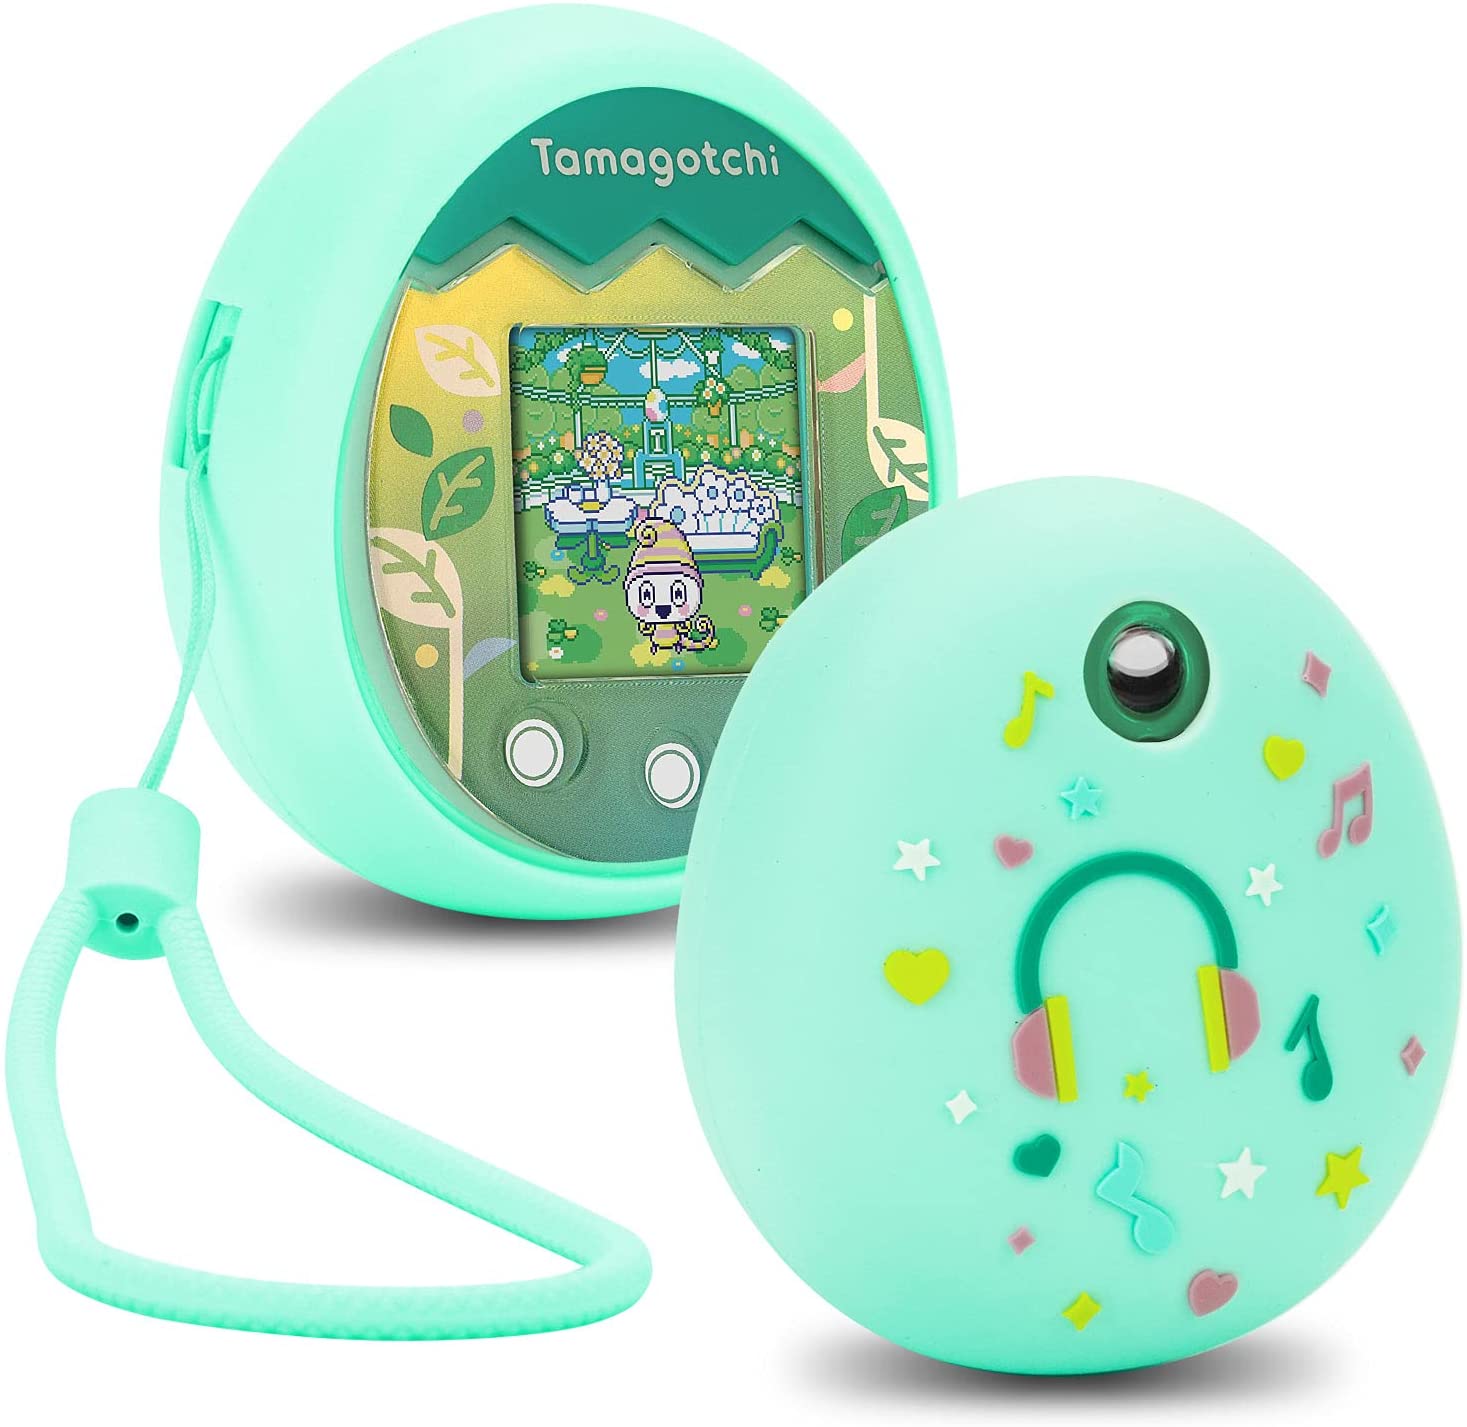 MGZNMTY, MGZNMTY Silicone Cover Case Compatible with Tamagotchi Pix Virtual Pet Machine with Hand Strap (Green)